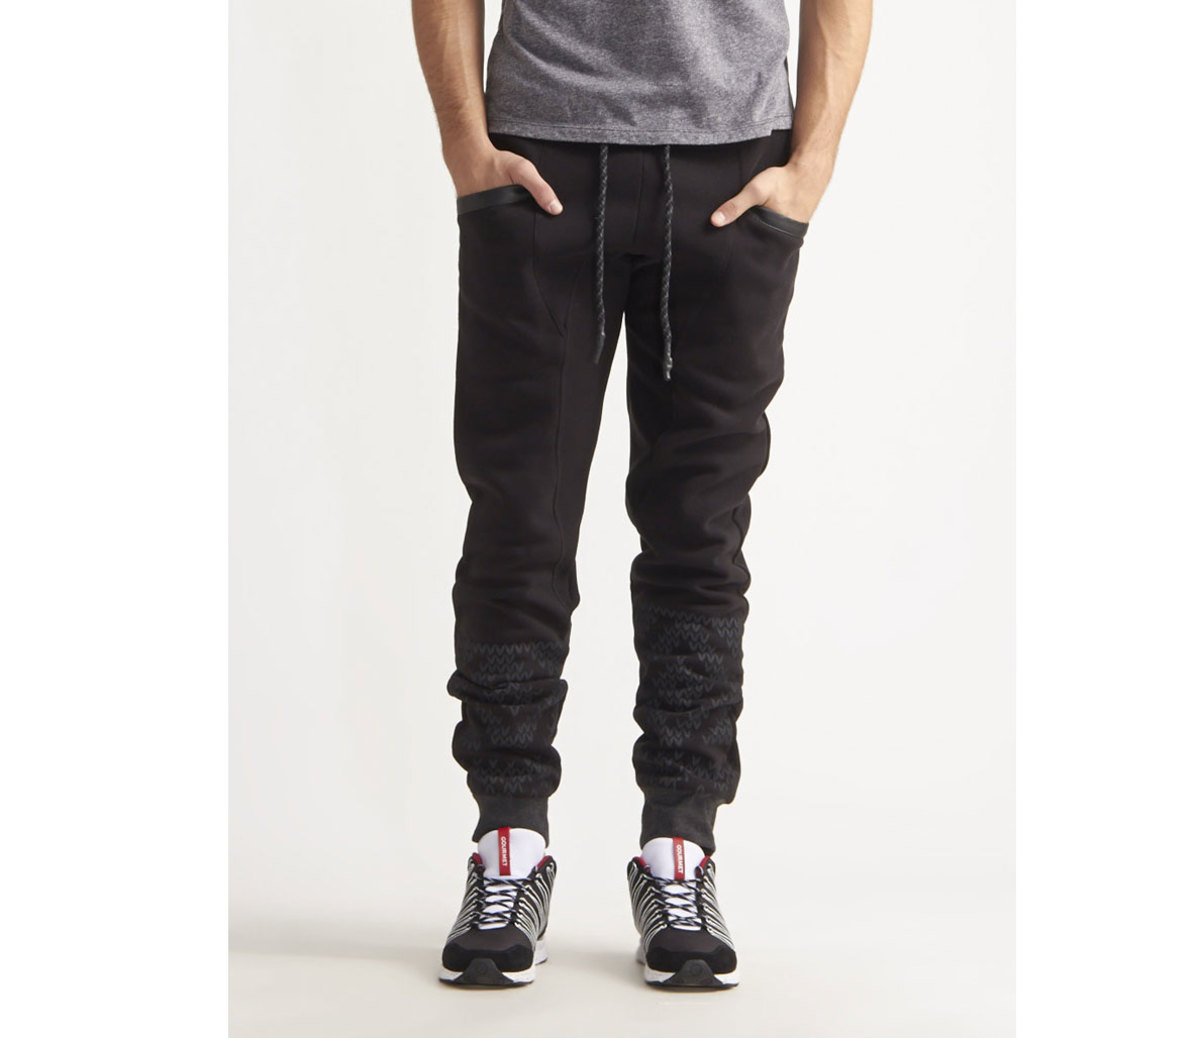 Editor Obsession Jogger Pants - Men's Journal